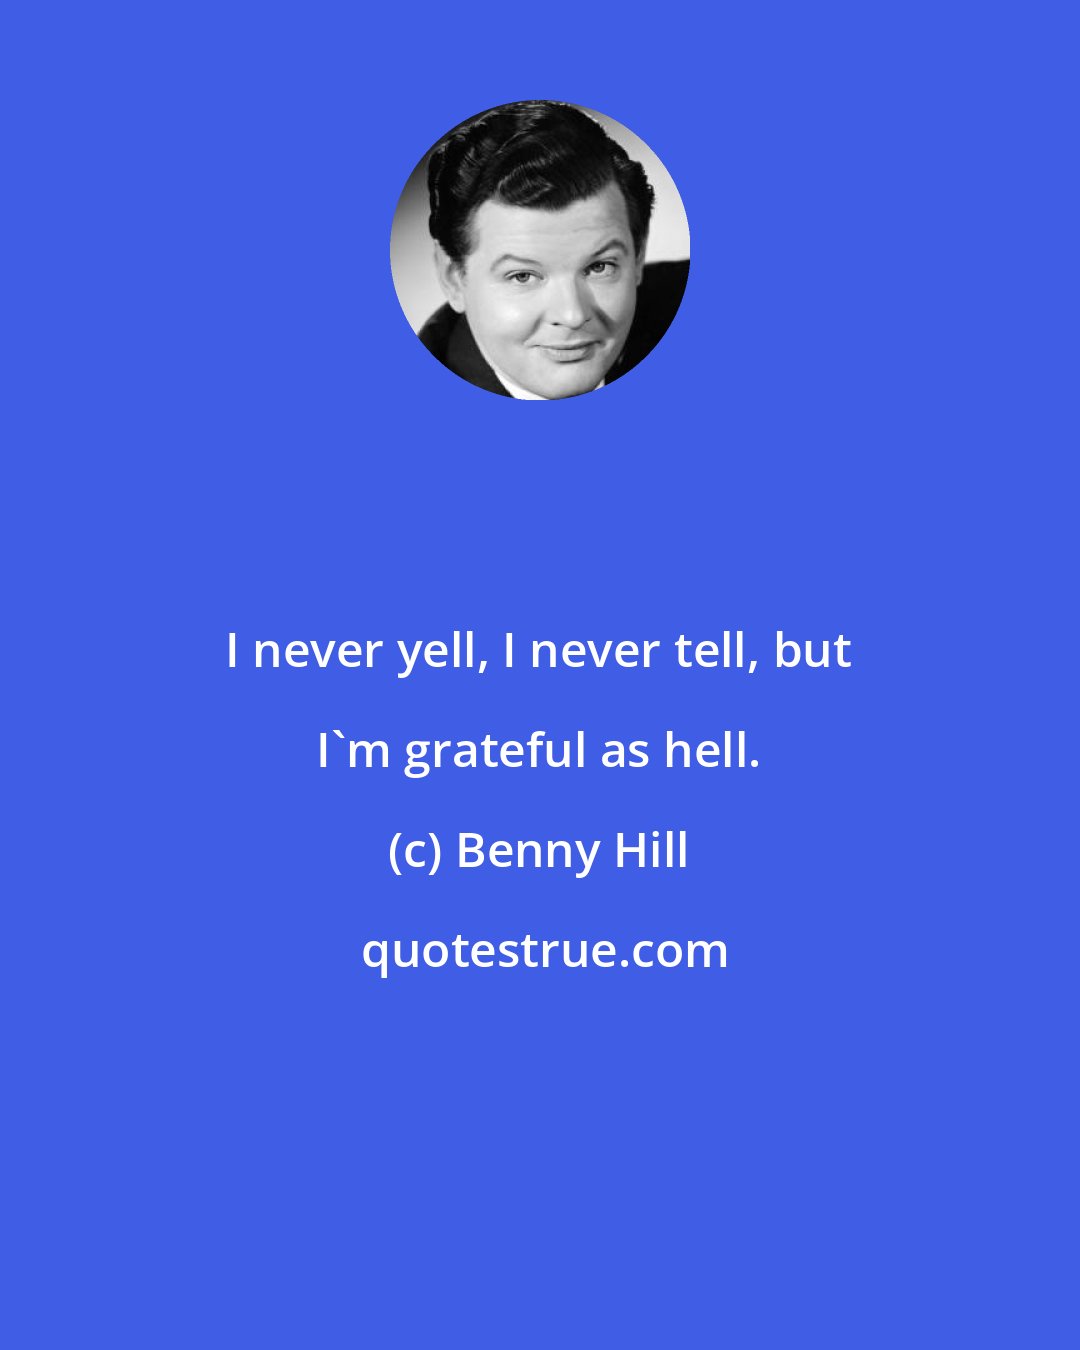 Benny Hill: I never yell, I never tell, but I'm grateful as hell.